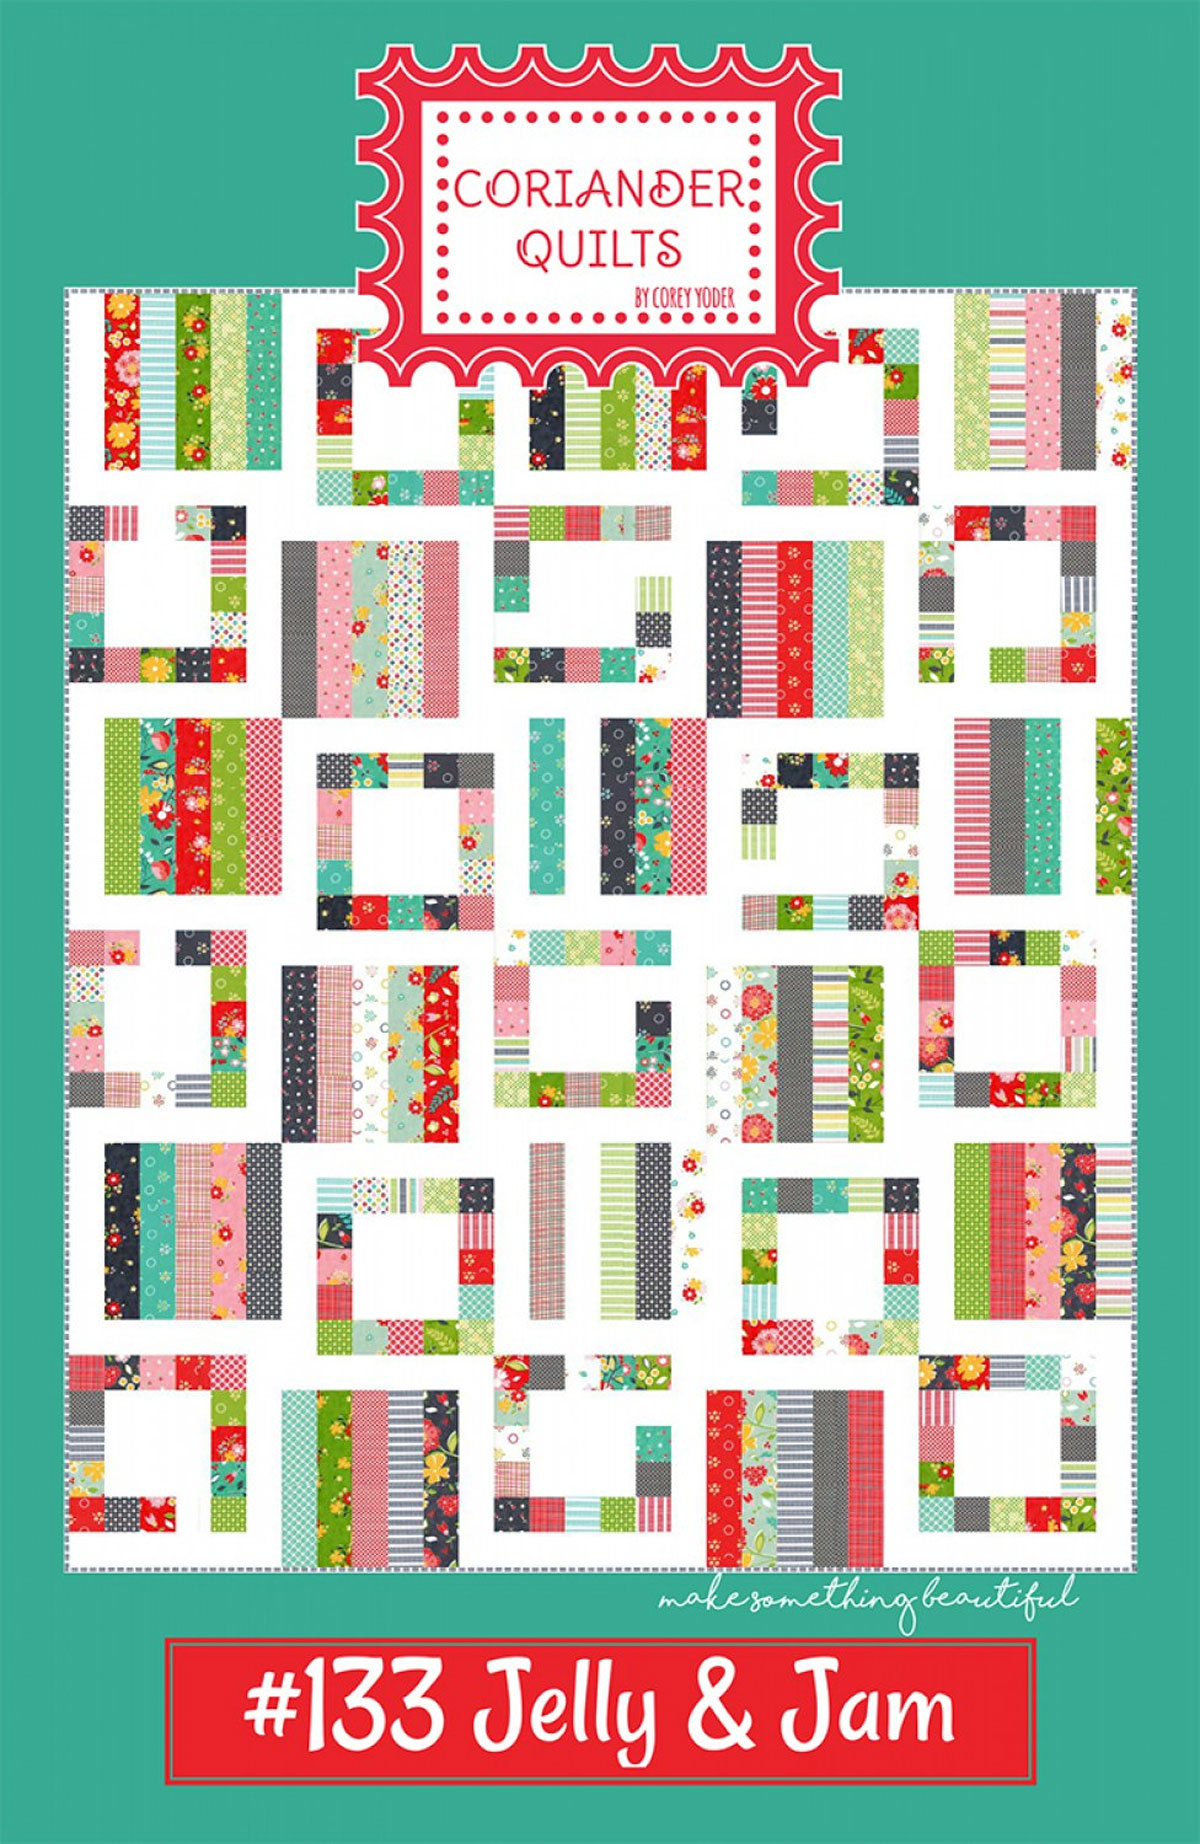 Jelly-and-Jam-quilt-sewing-pattern-Coriander-Quilts-front